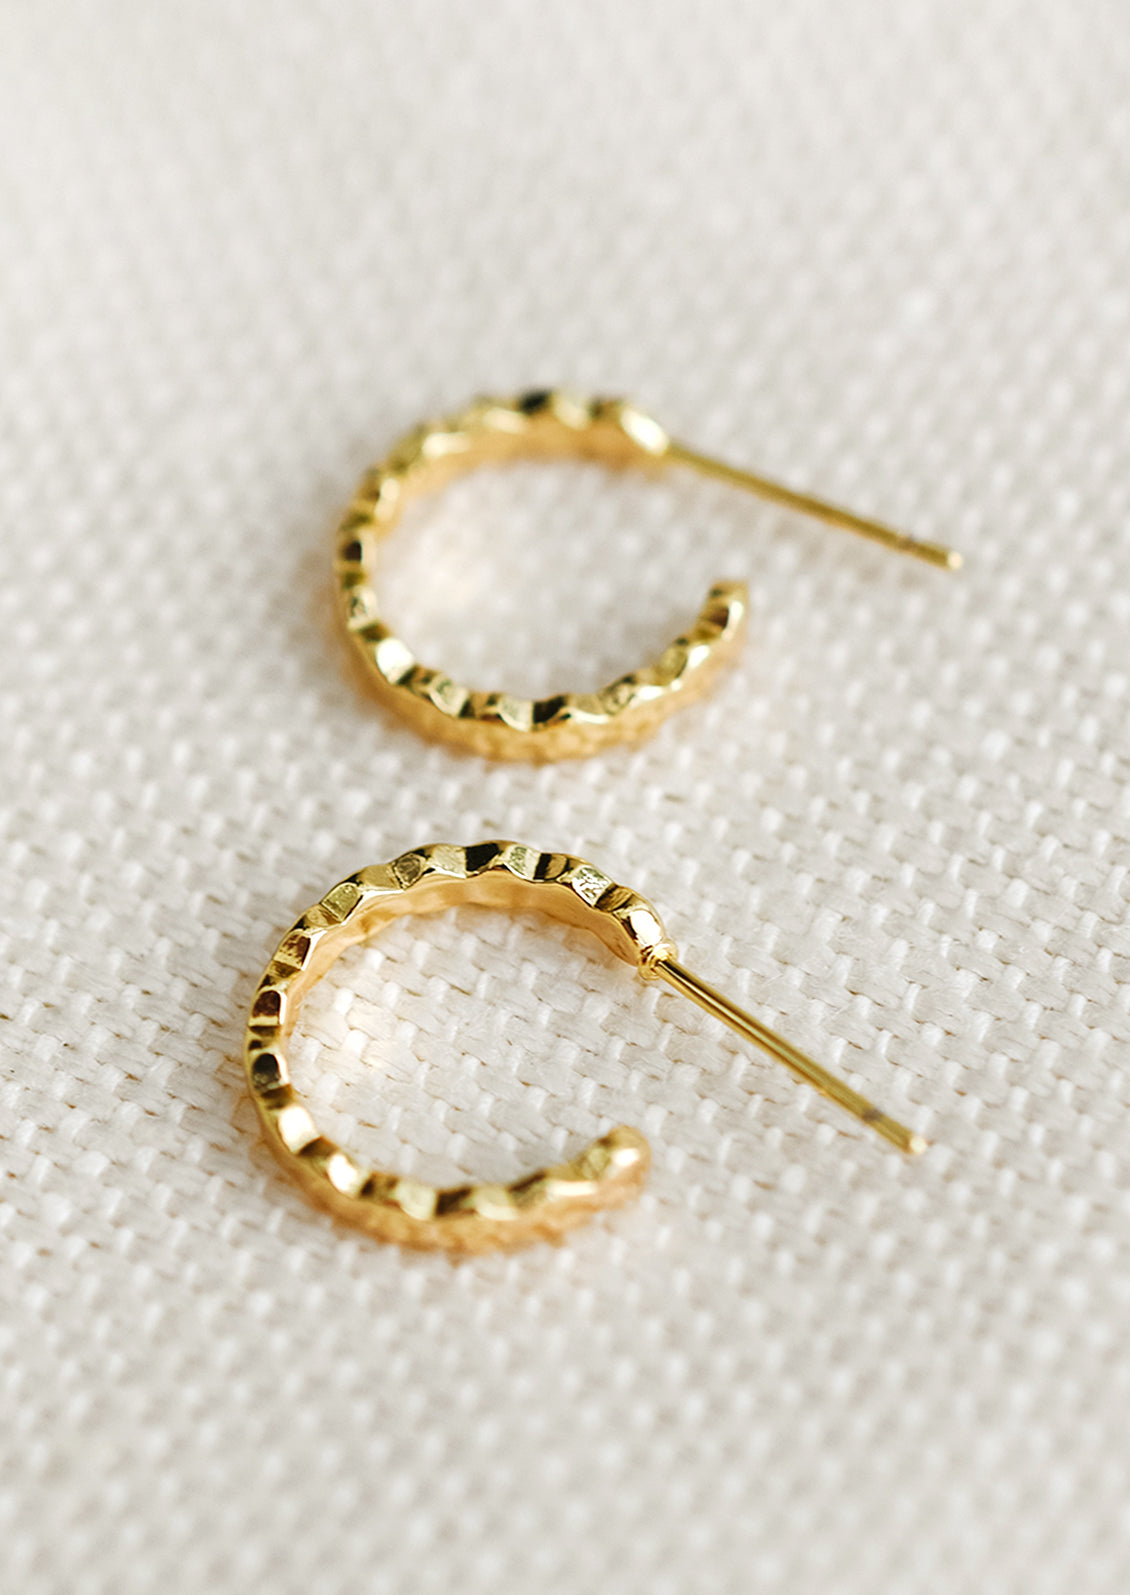 A pair of small gold hoop earrings with wavy shape.